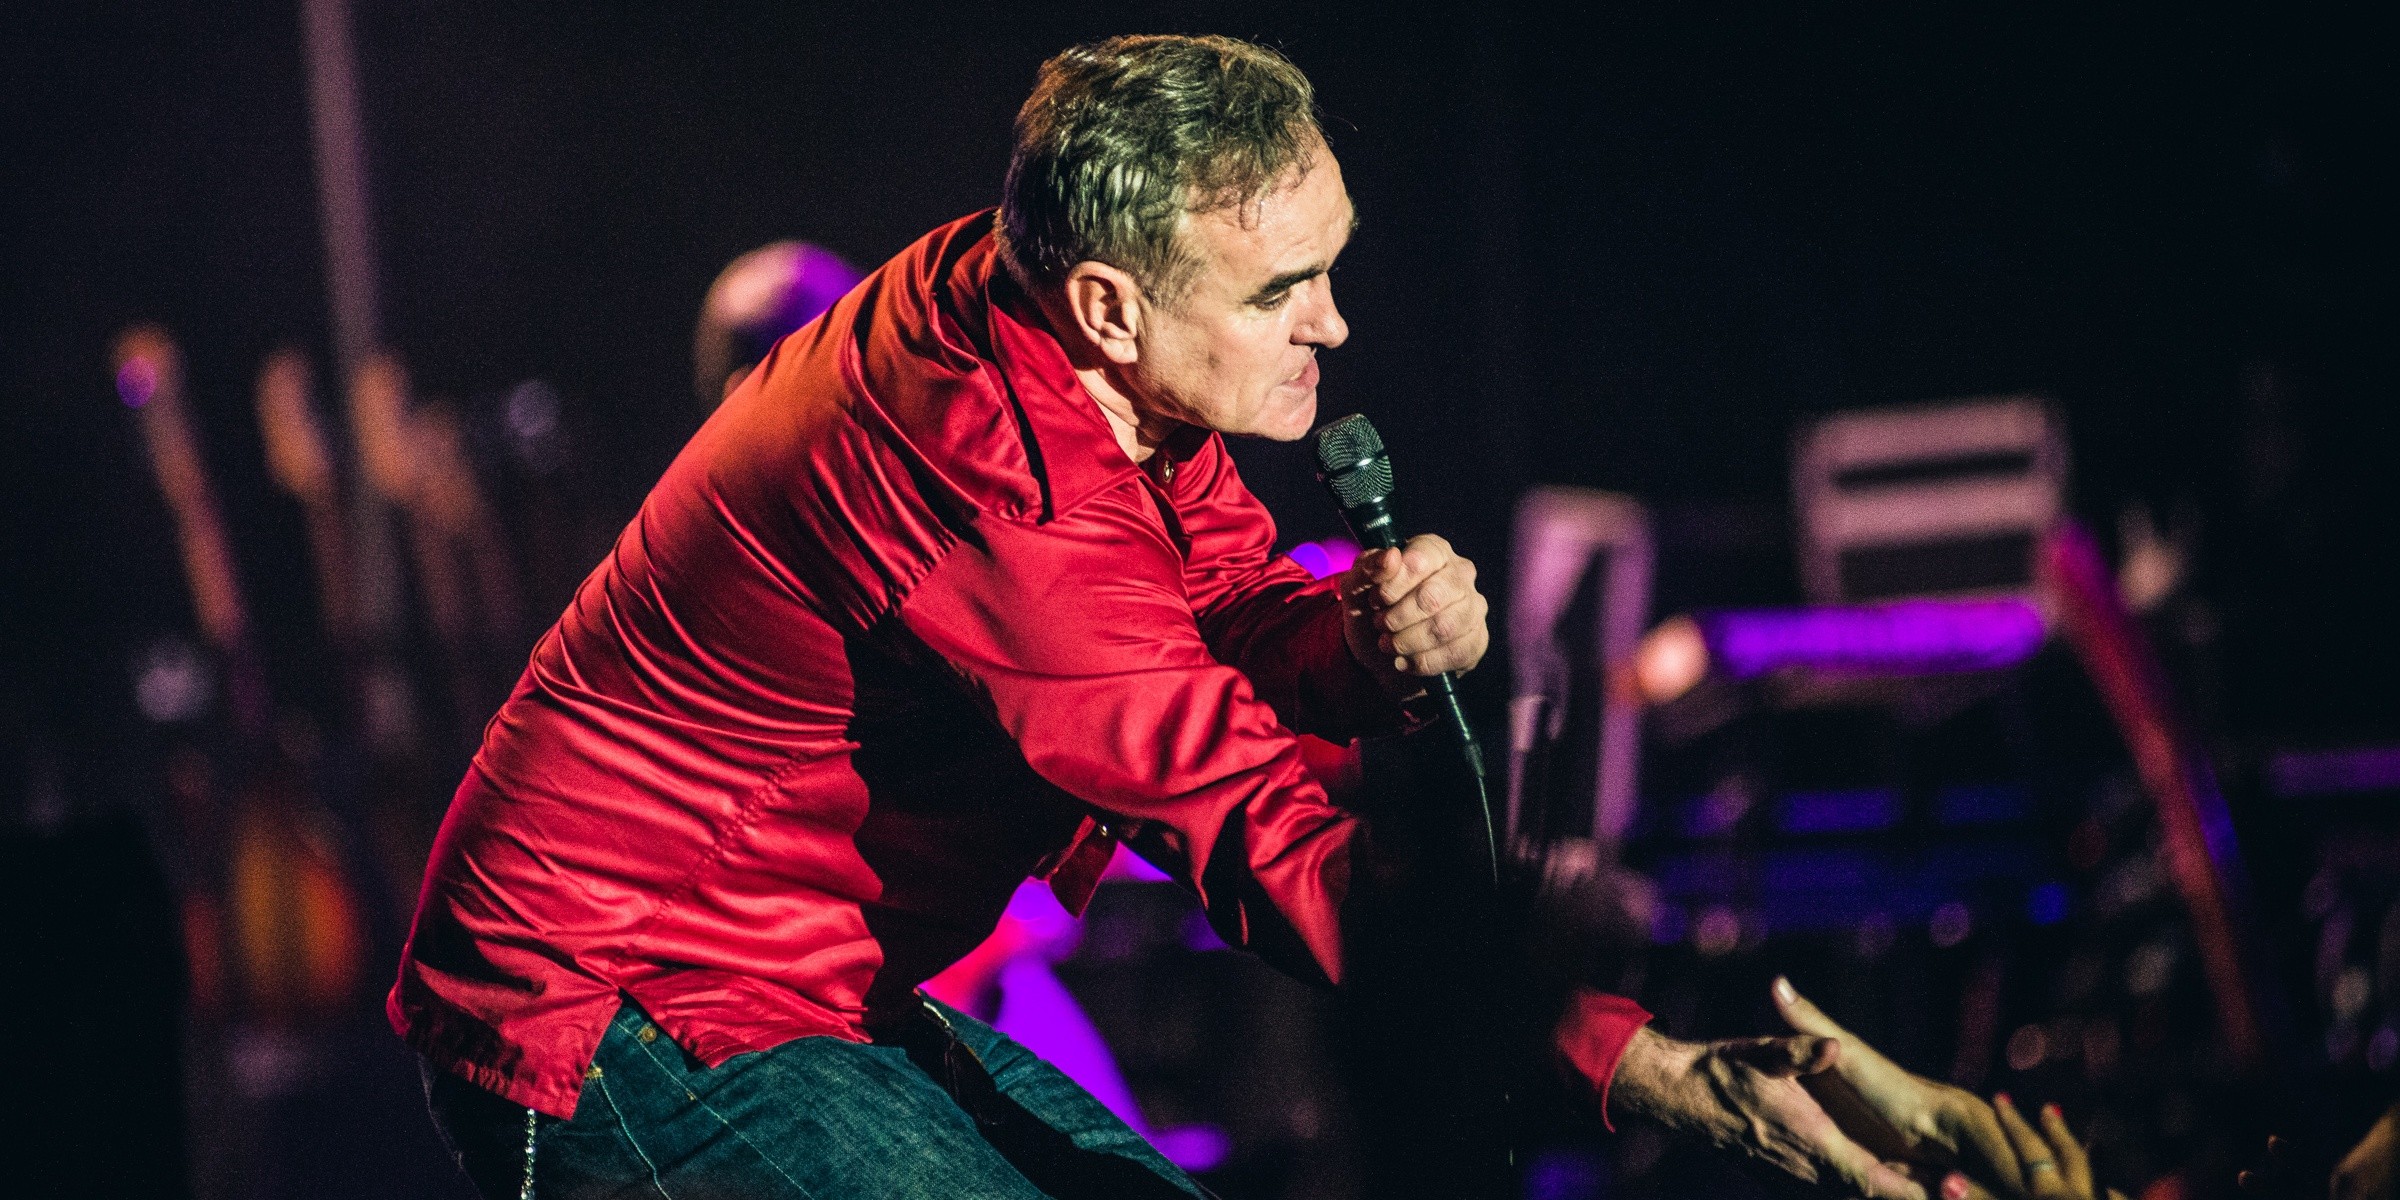 GIG REPORT: Morrissey settles in on solo legacy with second Singapore show